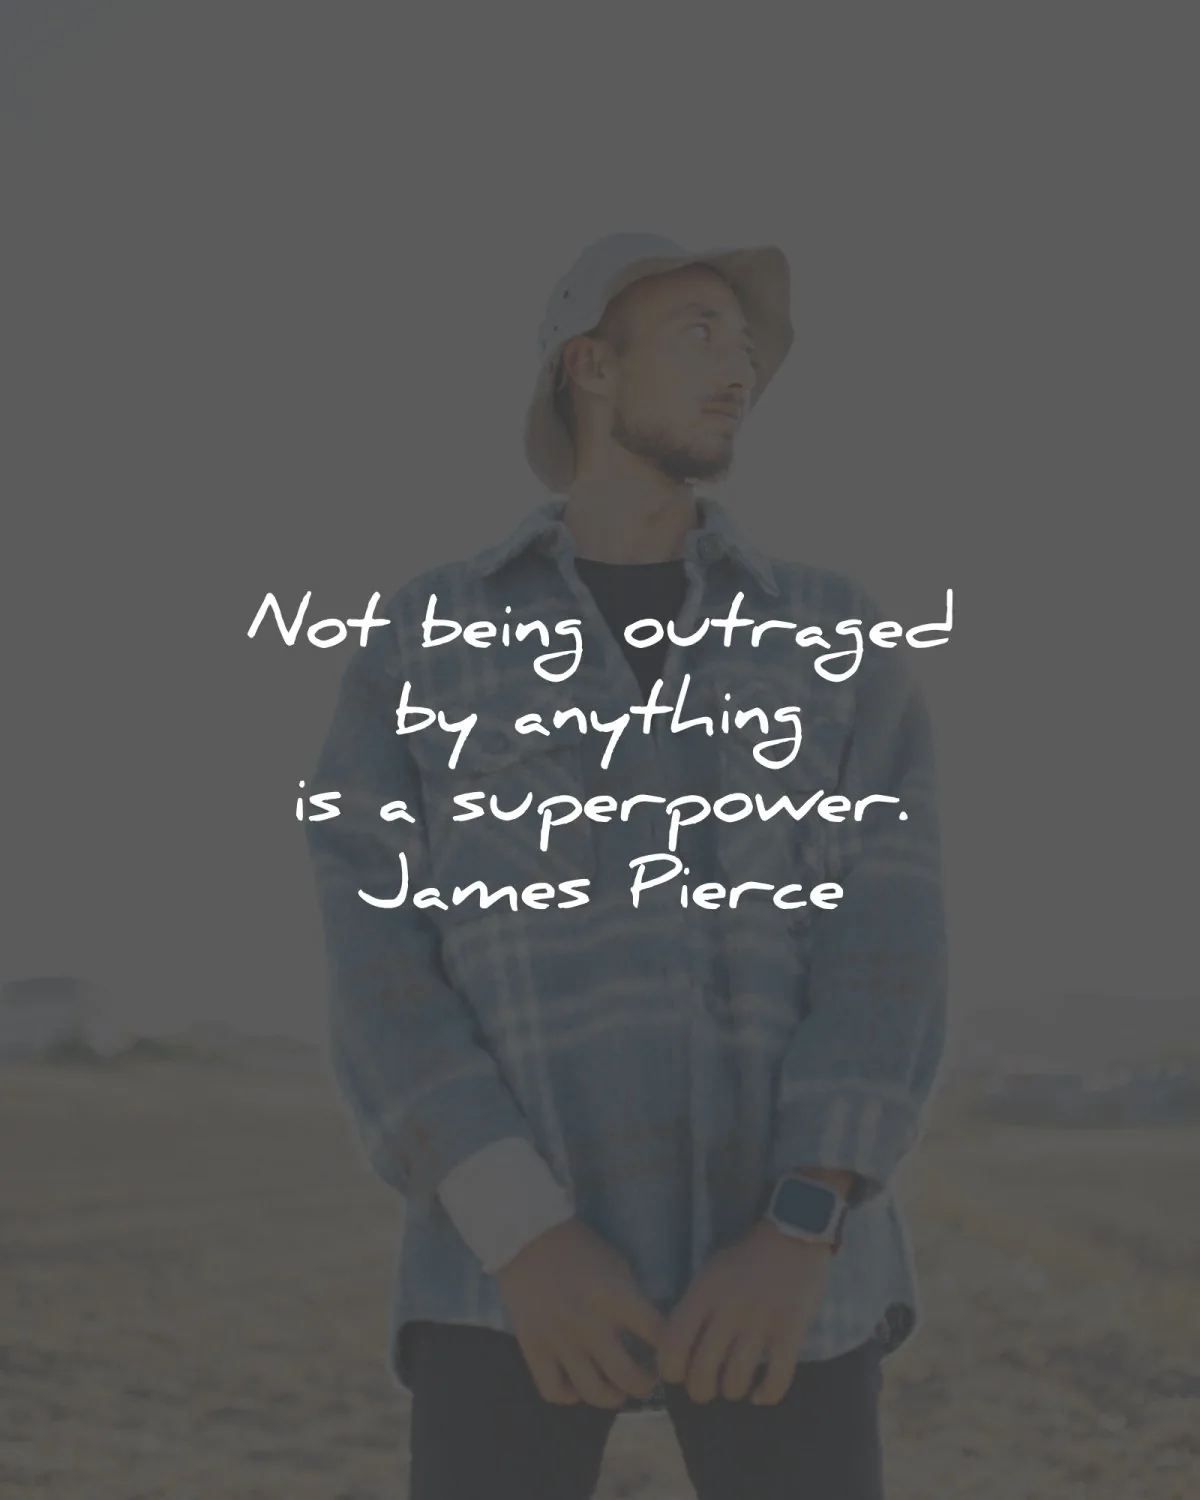 anger quotes being outraged anything superpower james pierce wisdom